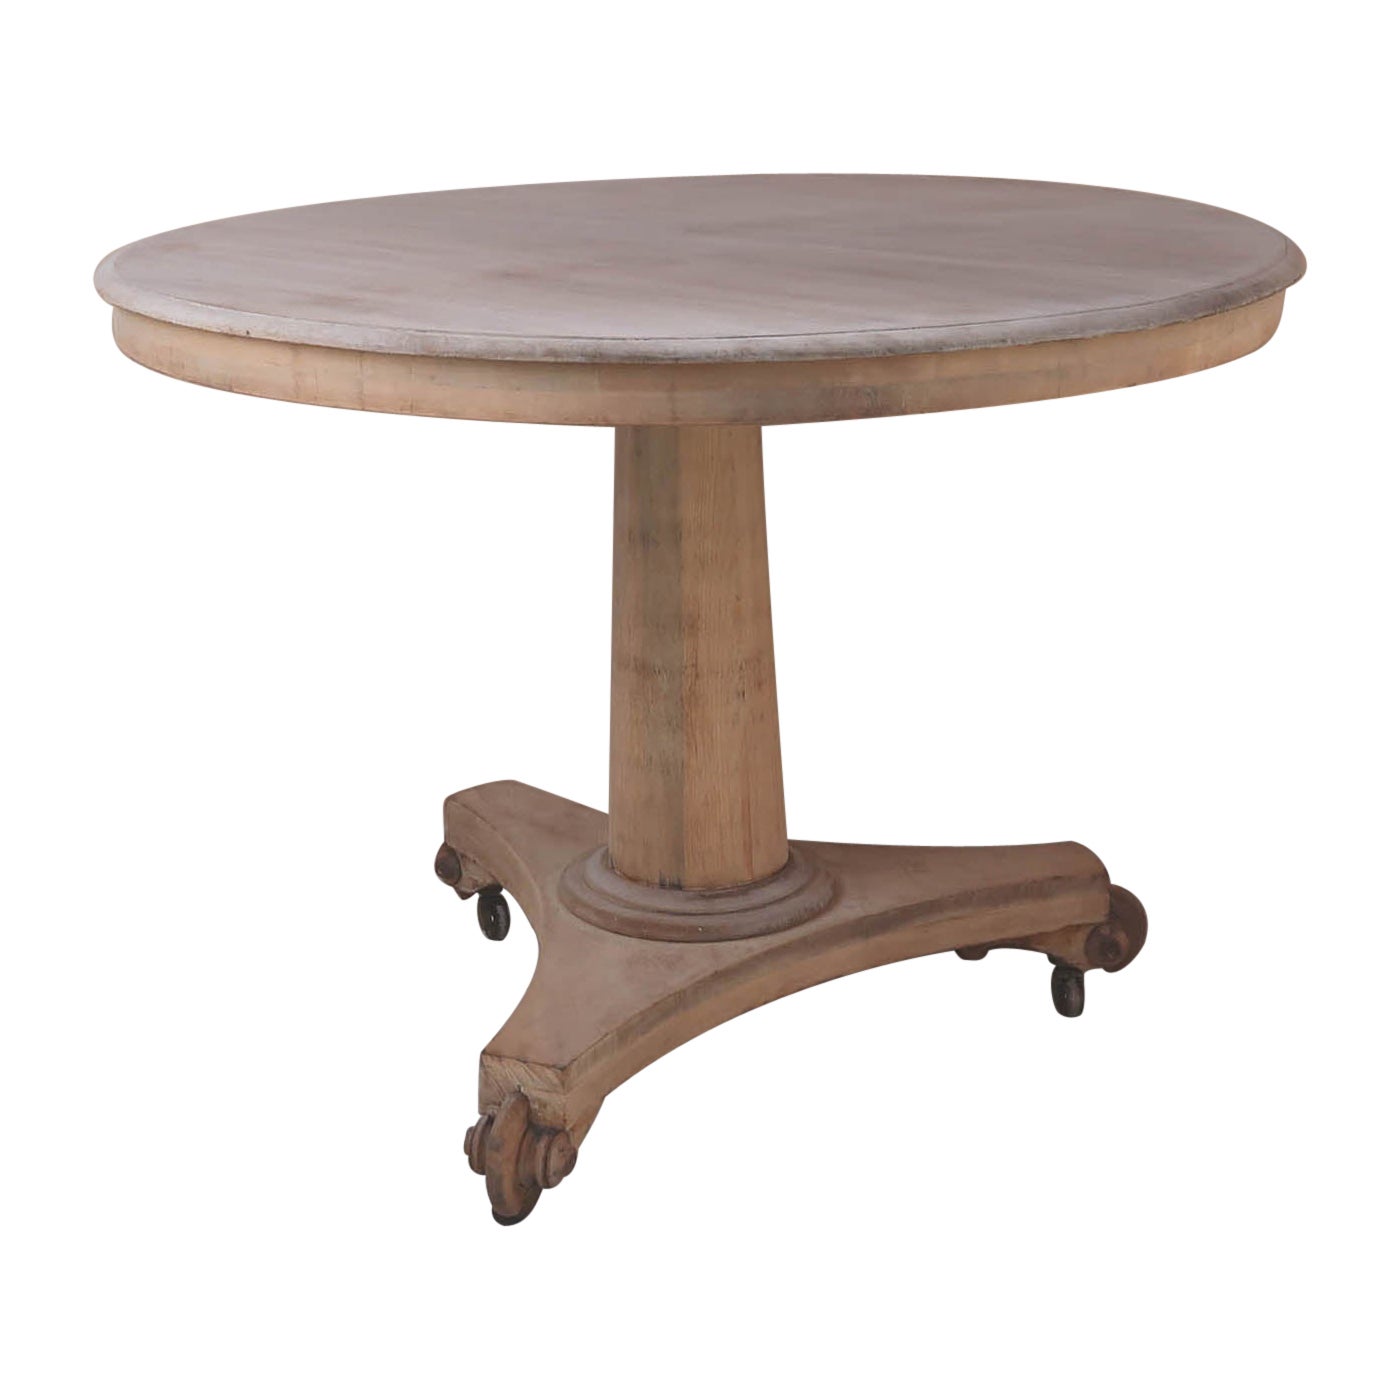 Small Antique Palladian Style Round Bleached Table, English, C.1835